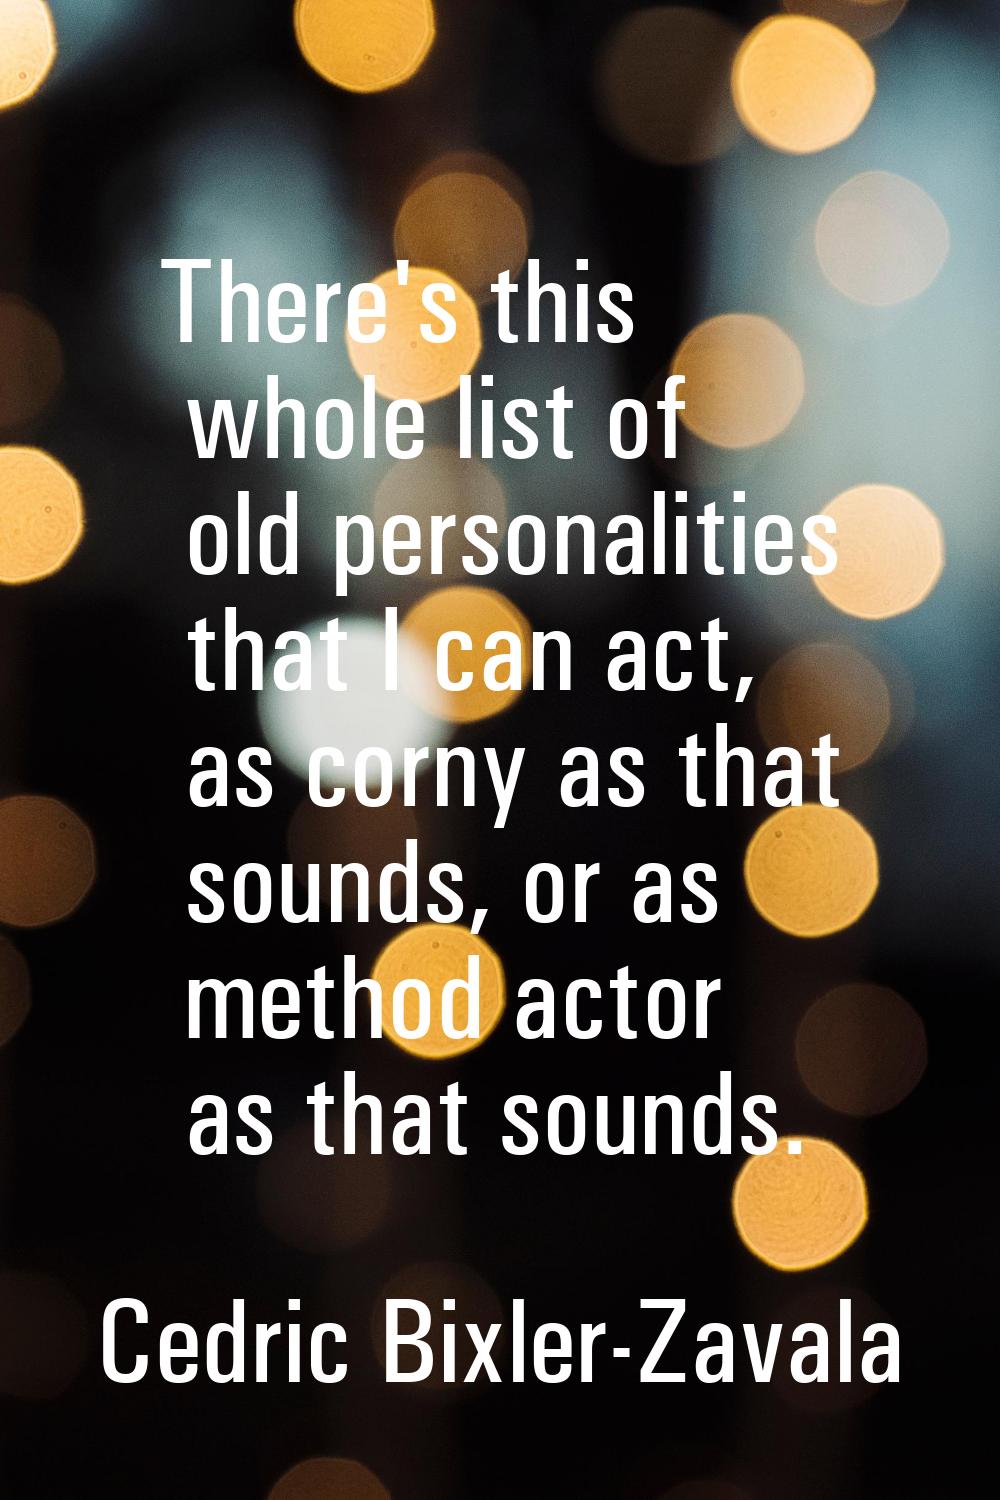 There's this whole list of old personalities that I can act, as corny as that sounds, or as method 